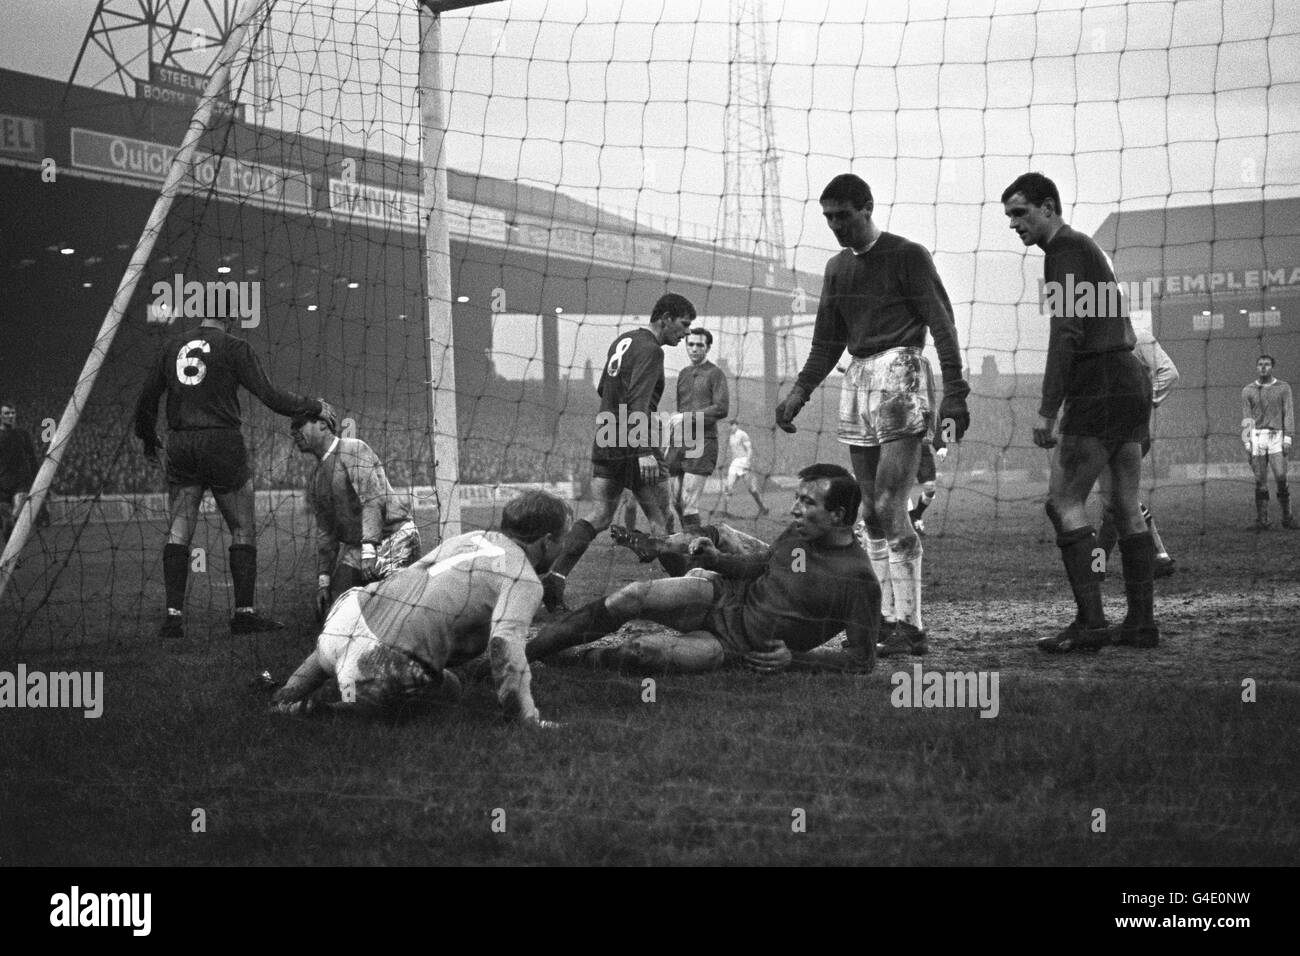 Soccer - League Division One - Manchester City v West Bromwich Albion - Maine Road Stock Photo